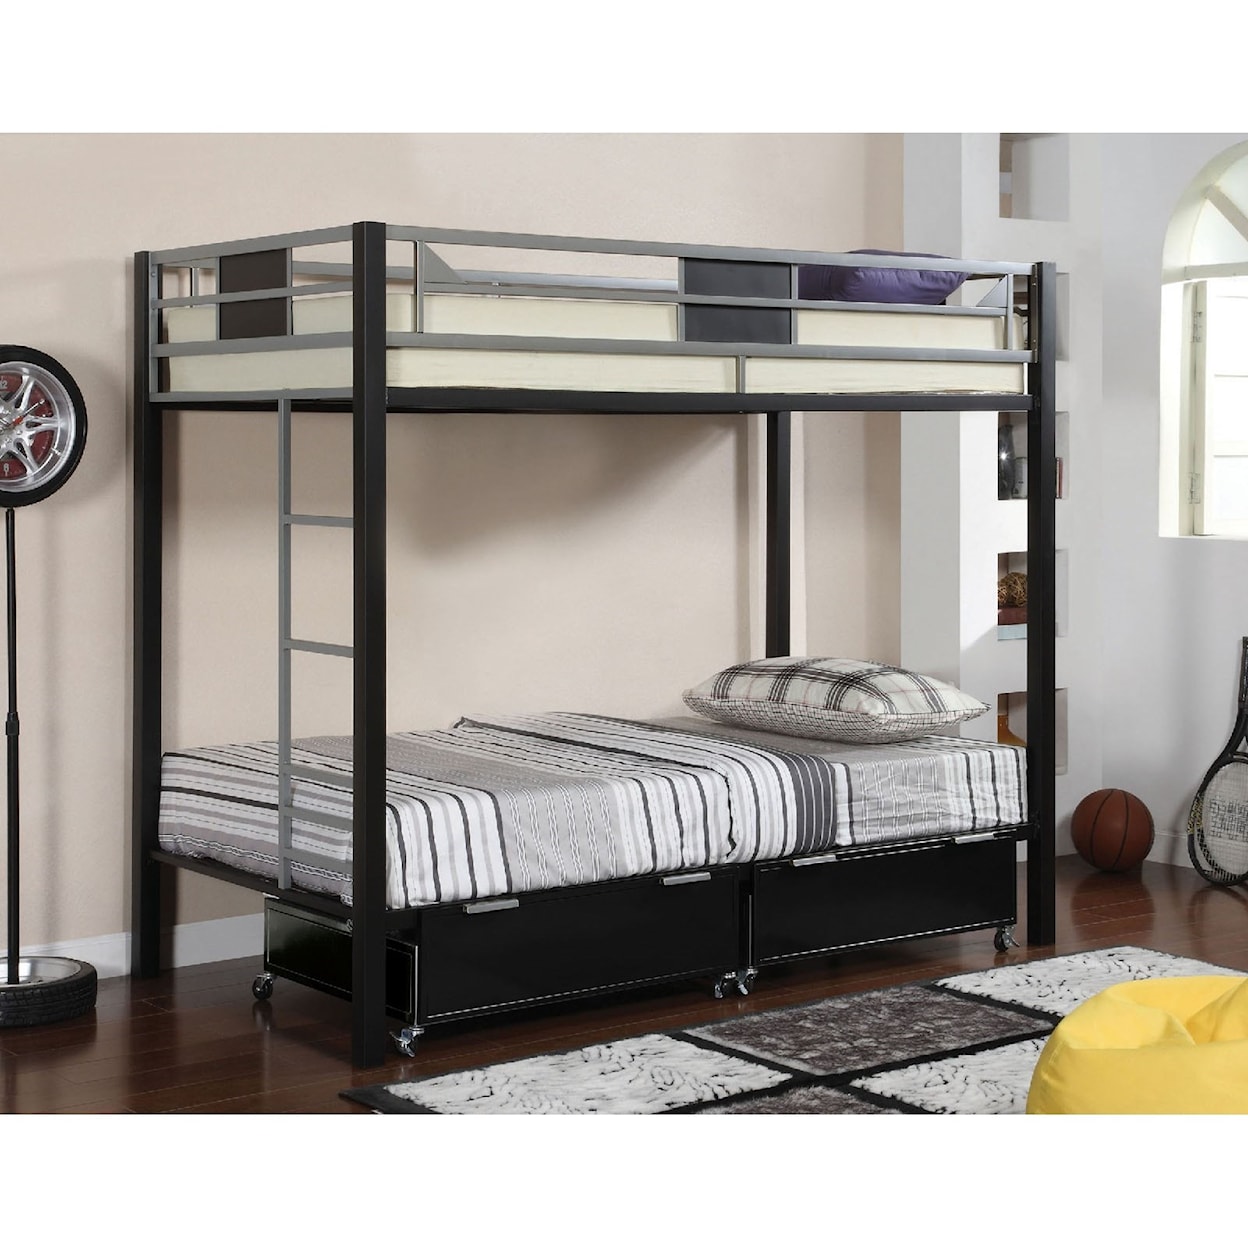 Furniture of America Clifton Twin OverTwin Bunk Bed